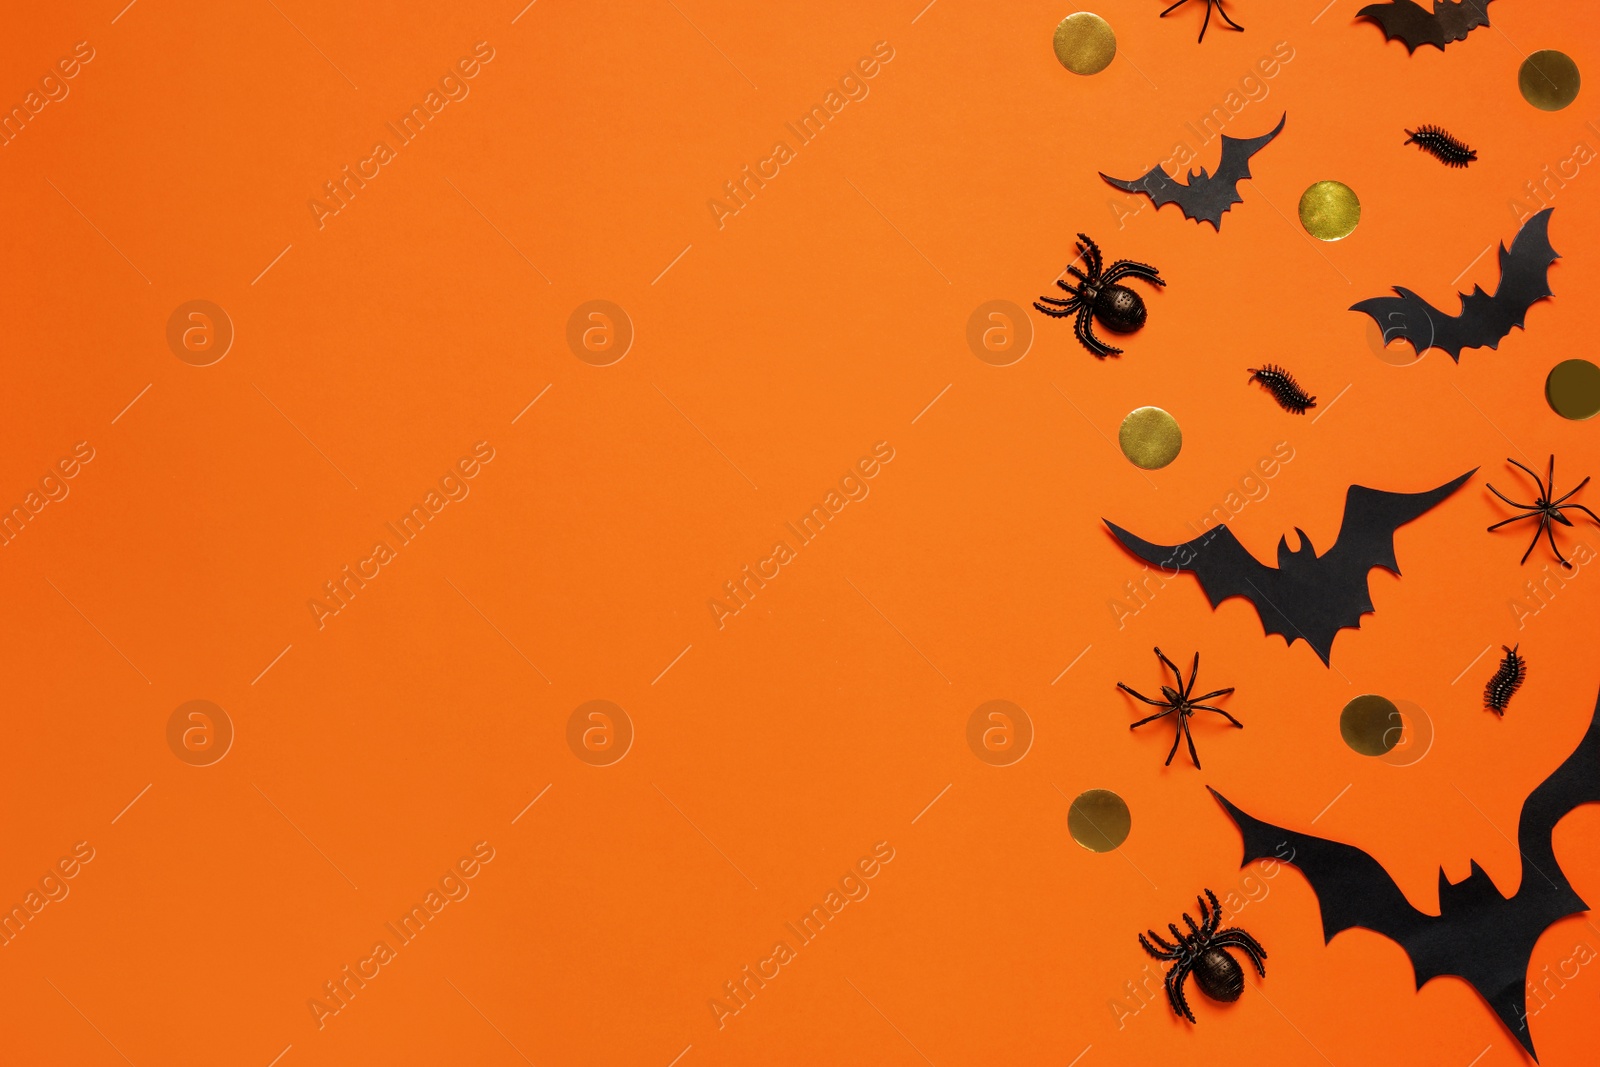 Photo of Flat lay composition with paper bats and spiders on orange background, space for text. Halloween decor